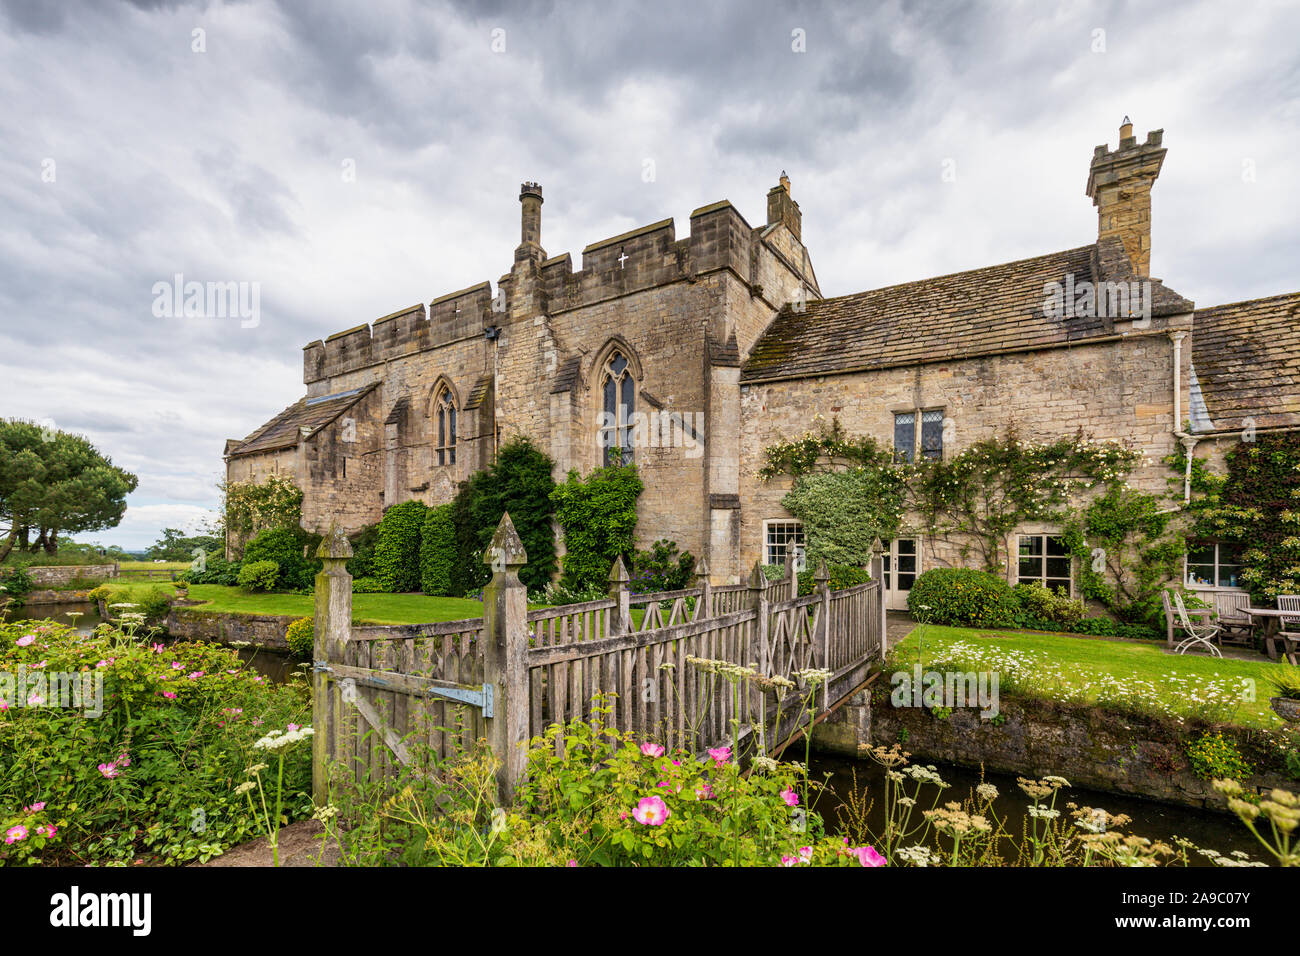 Markenfield Hall is a picturesque early 14th-century moated Medieval manor house about 3 miles south of Ripon, North Yorkshire, England. Stock Photo